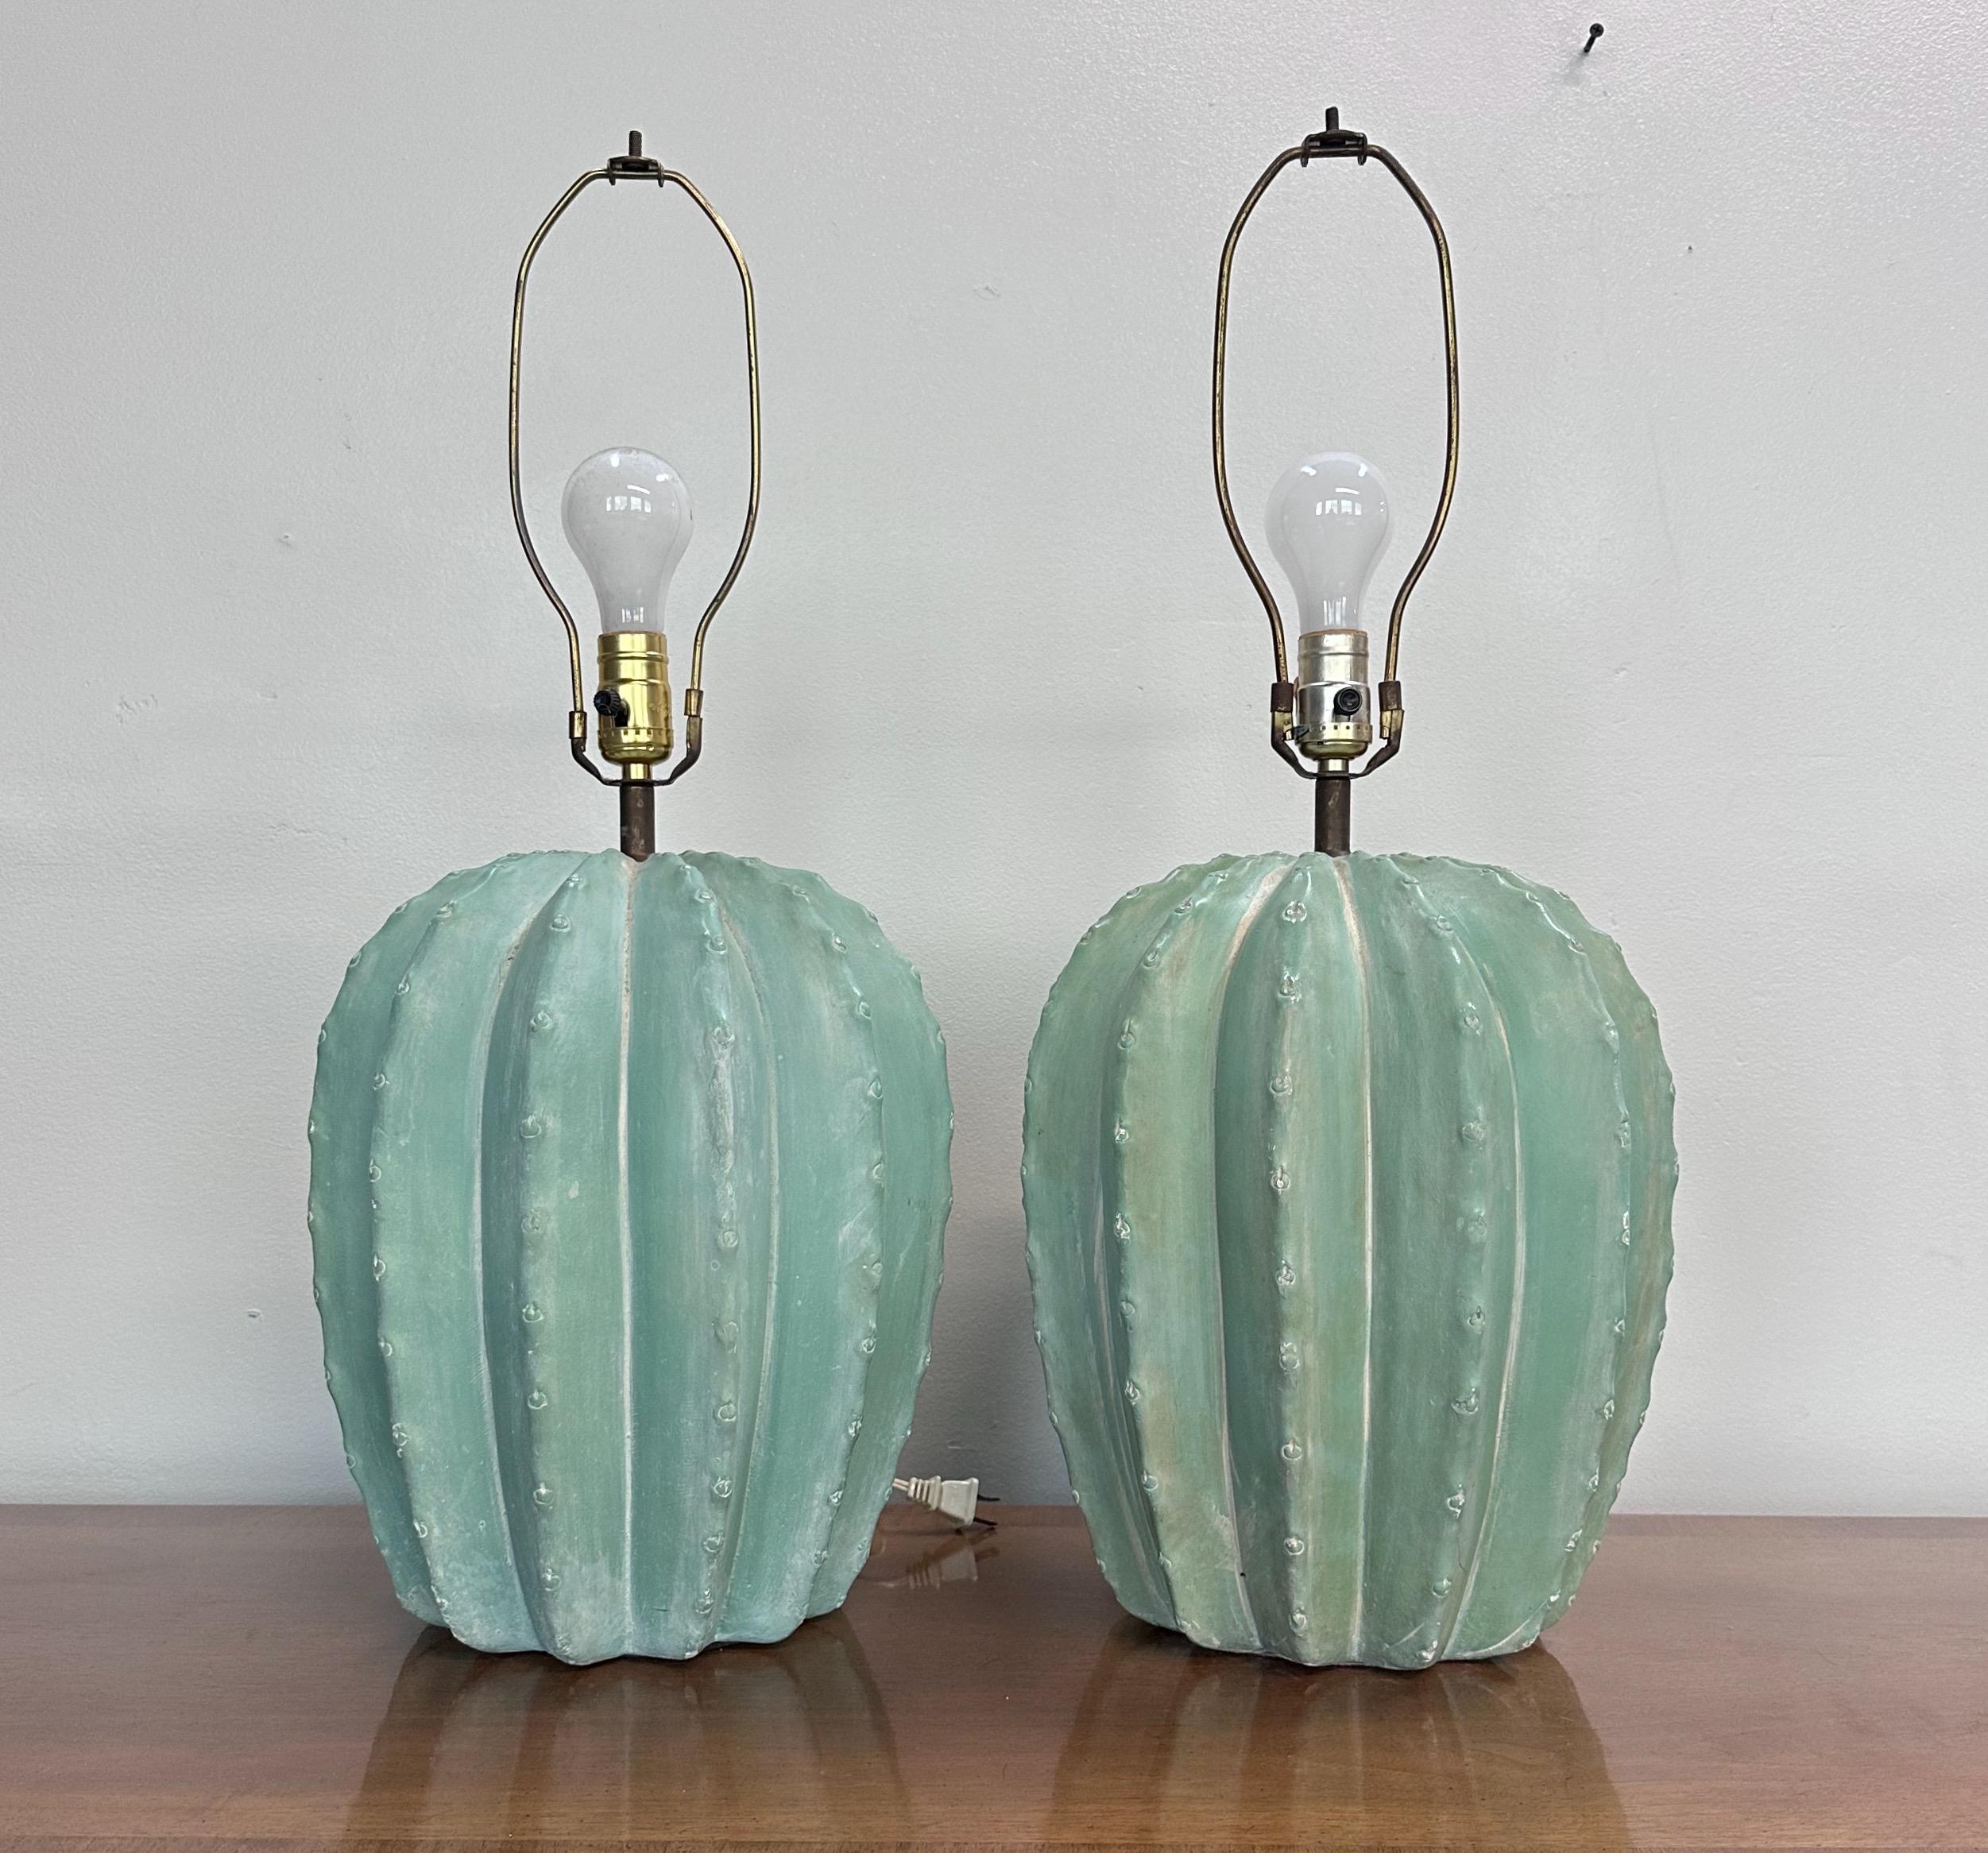 Pair of plaster cactus table lamps by Bon Art, these lamps will lend an eclectic air to any project.